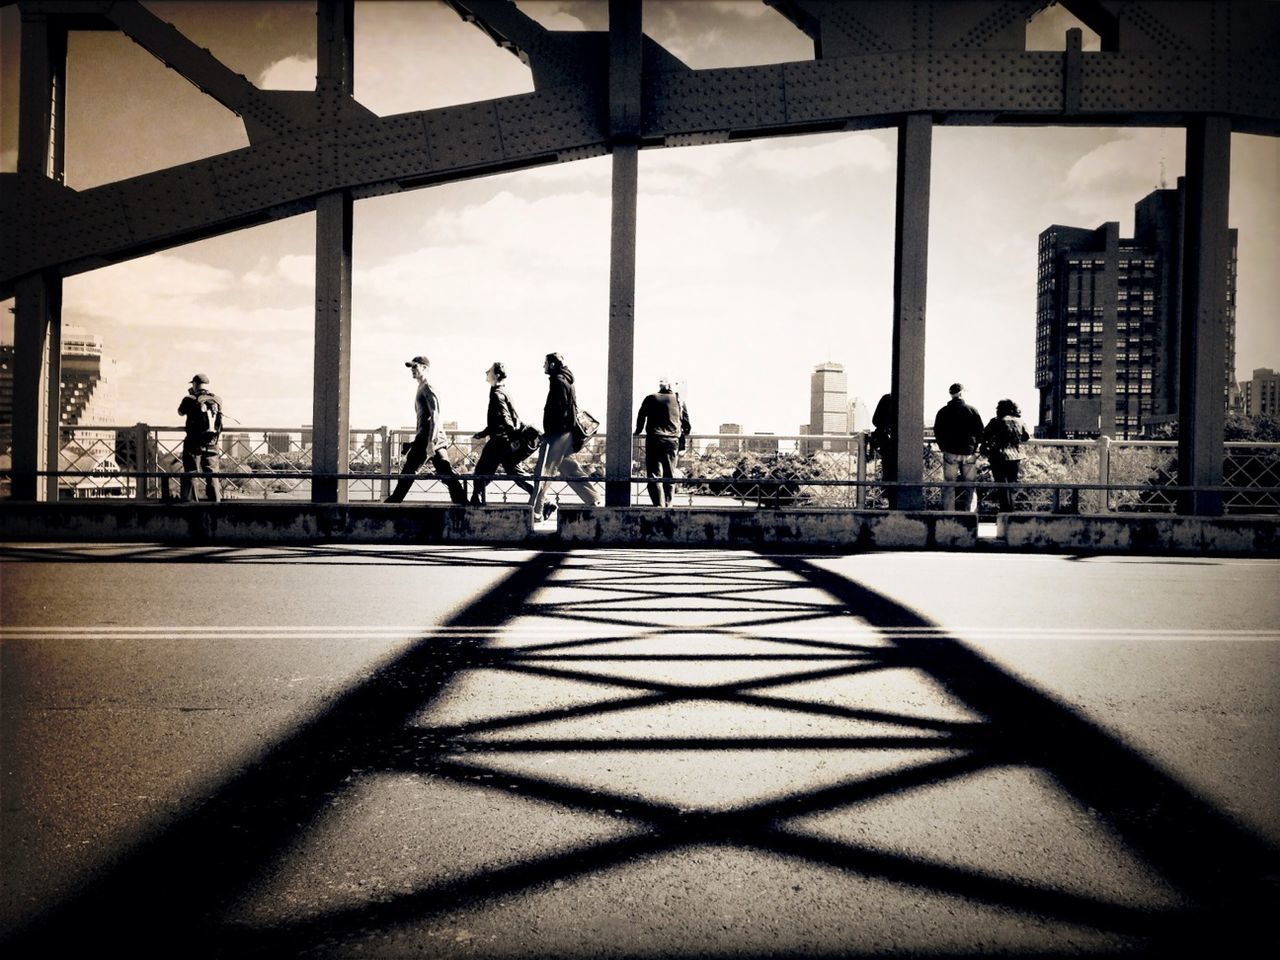 group of people, architecture, black, built structure, city, sunlight, light, shadow, silhouette, men, nature, darkness, sky, adult, monochrome, crowd, white, urban area, building exterior, city life, women, reflection, black and white, transportation, day, lifestyles, large group of people, outdoors, travel, travel destinations, leisure activity, group, monochrome photography, window, building